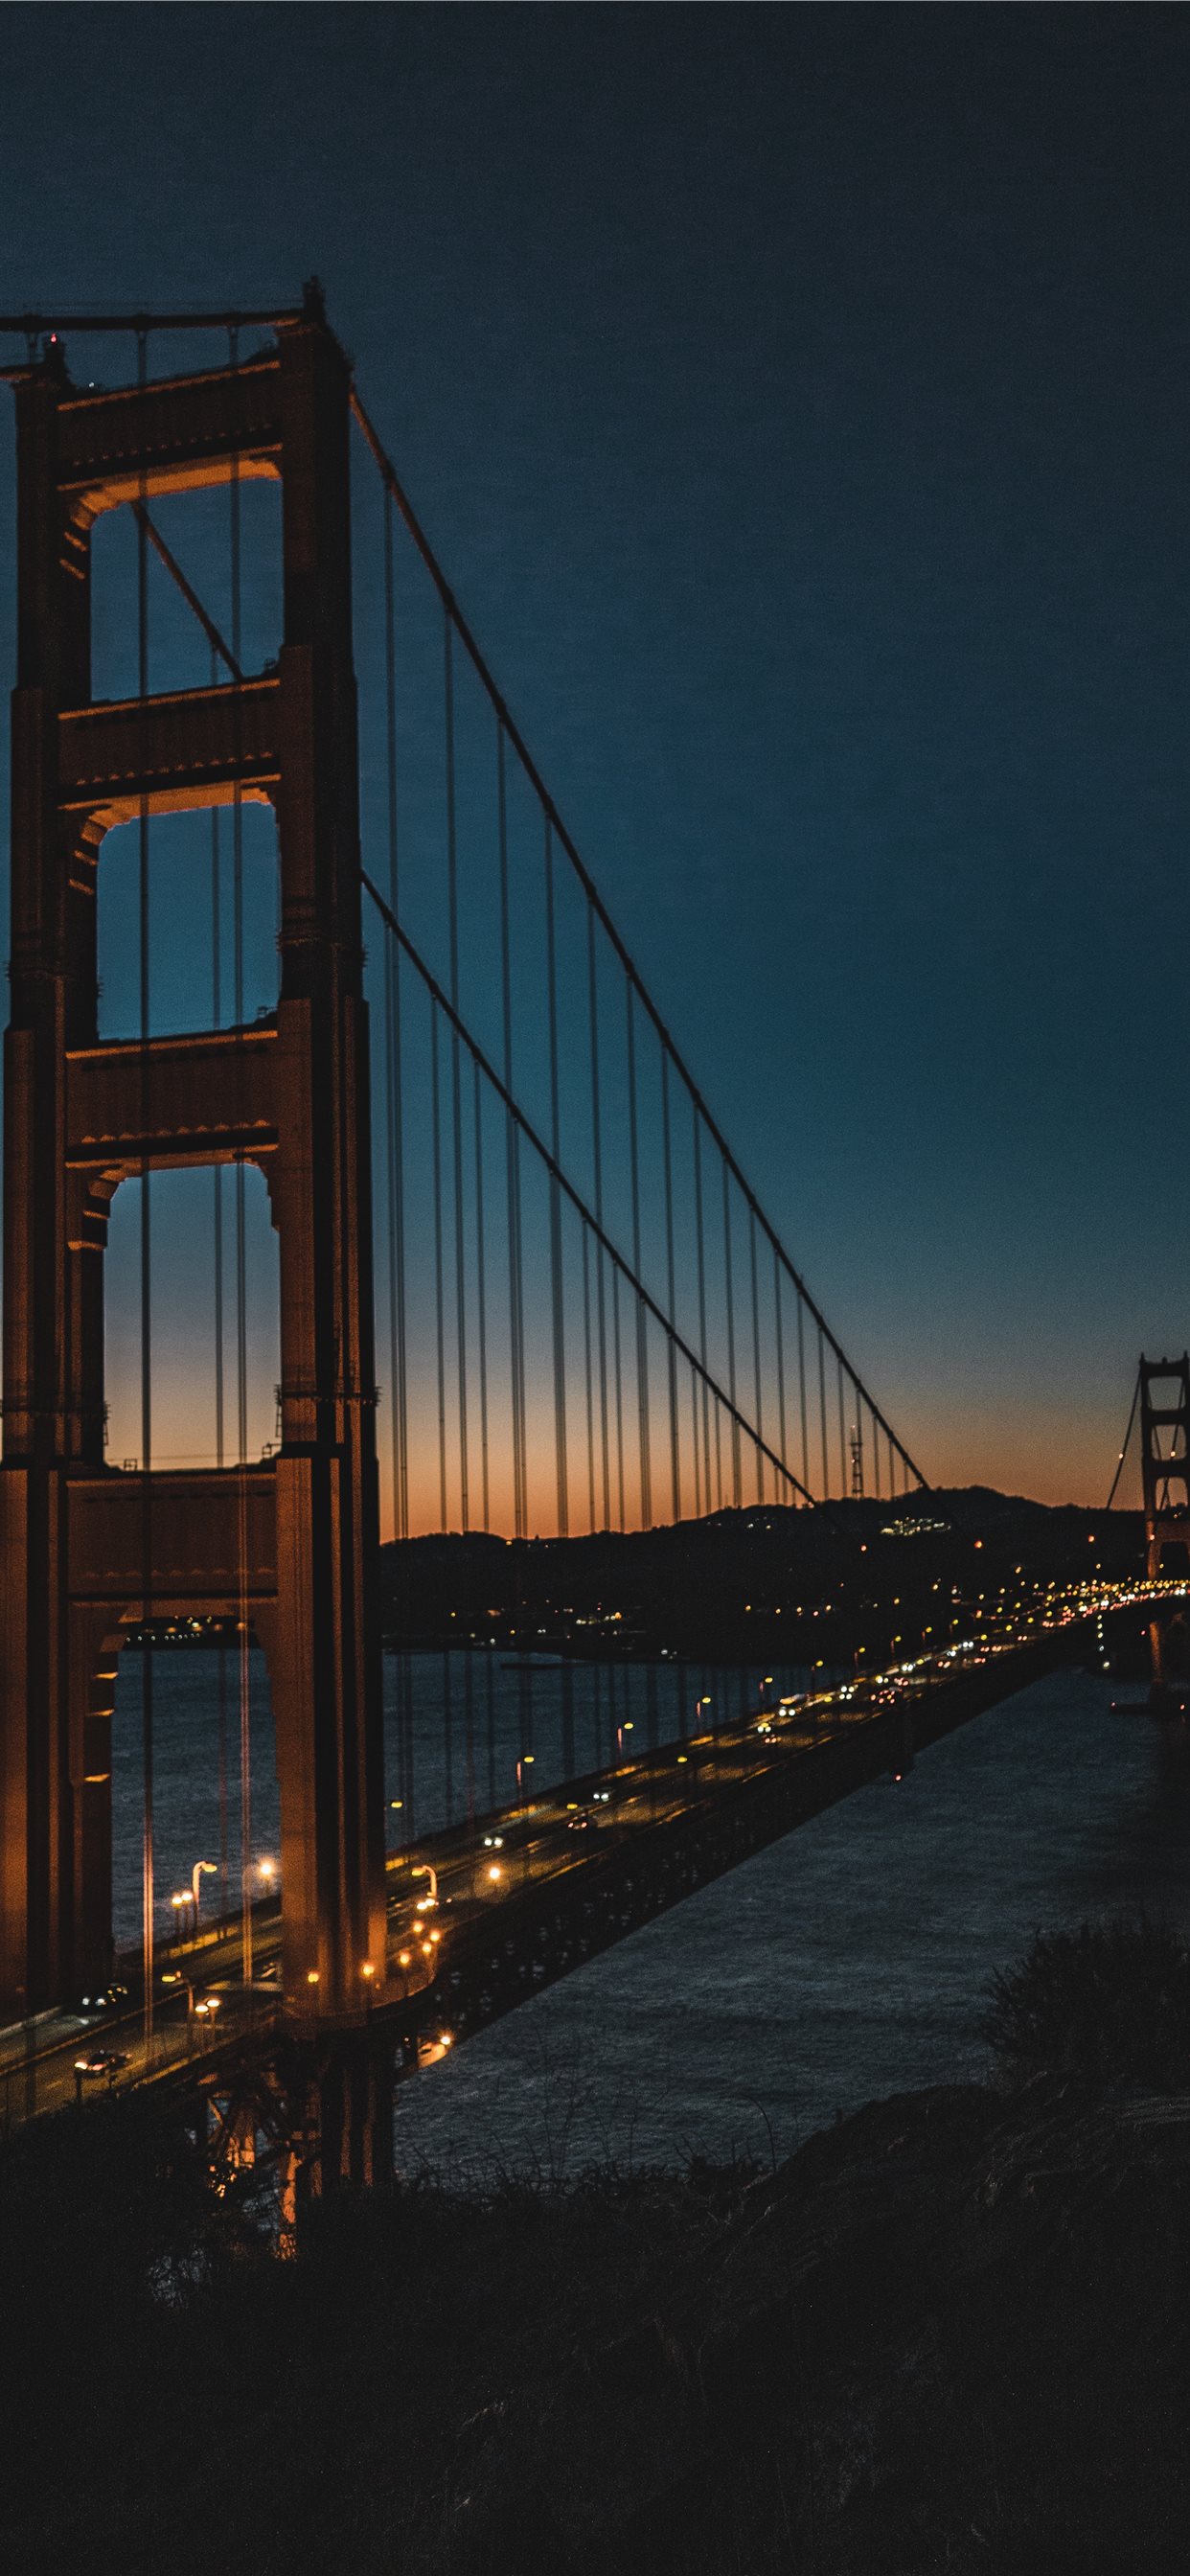 golden gate at night iPhone X Wallpaper Free Download